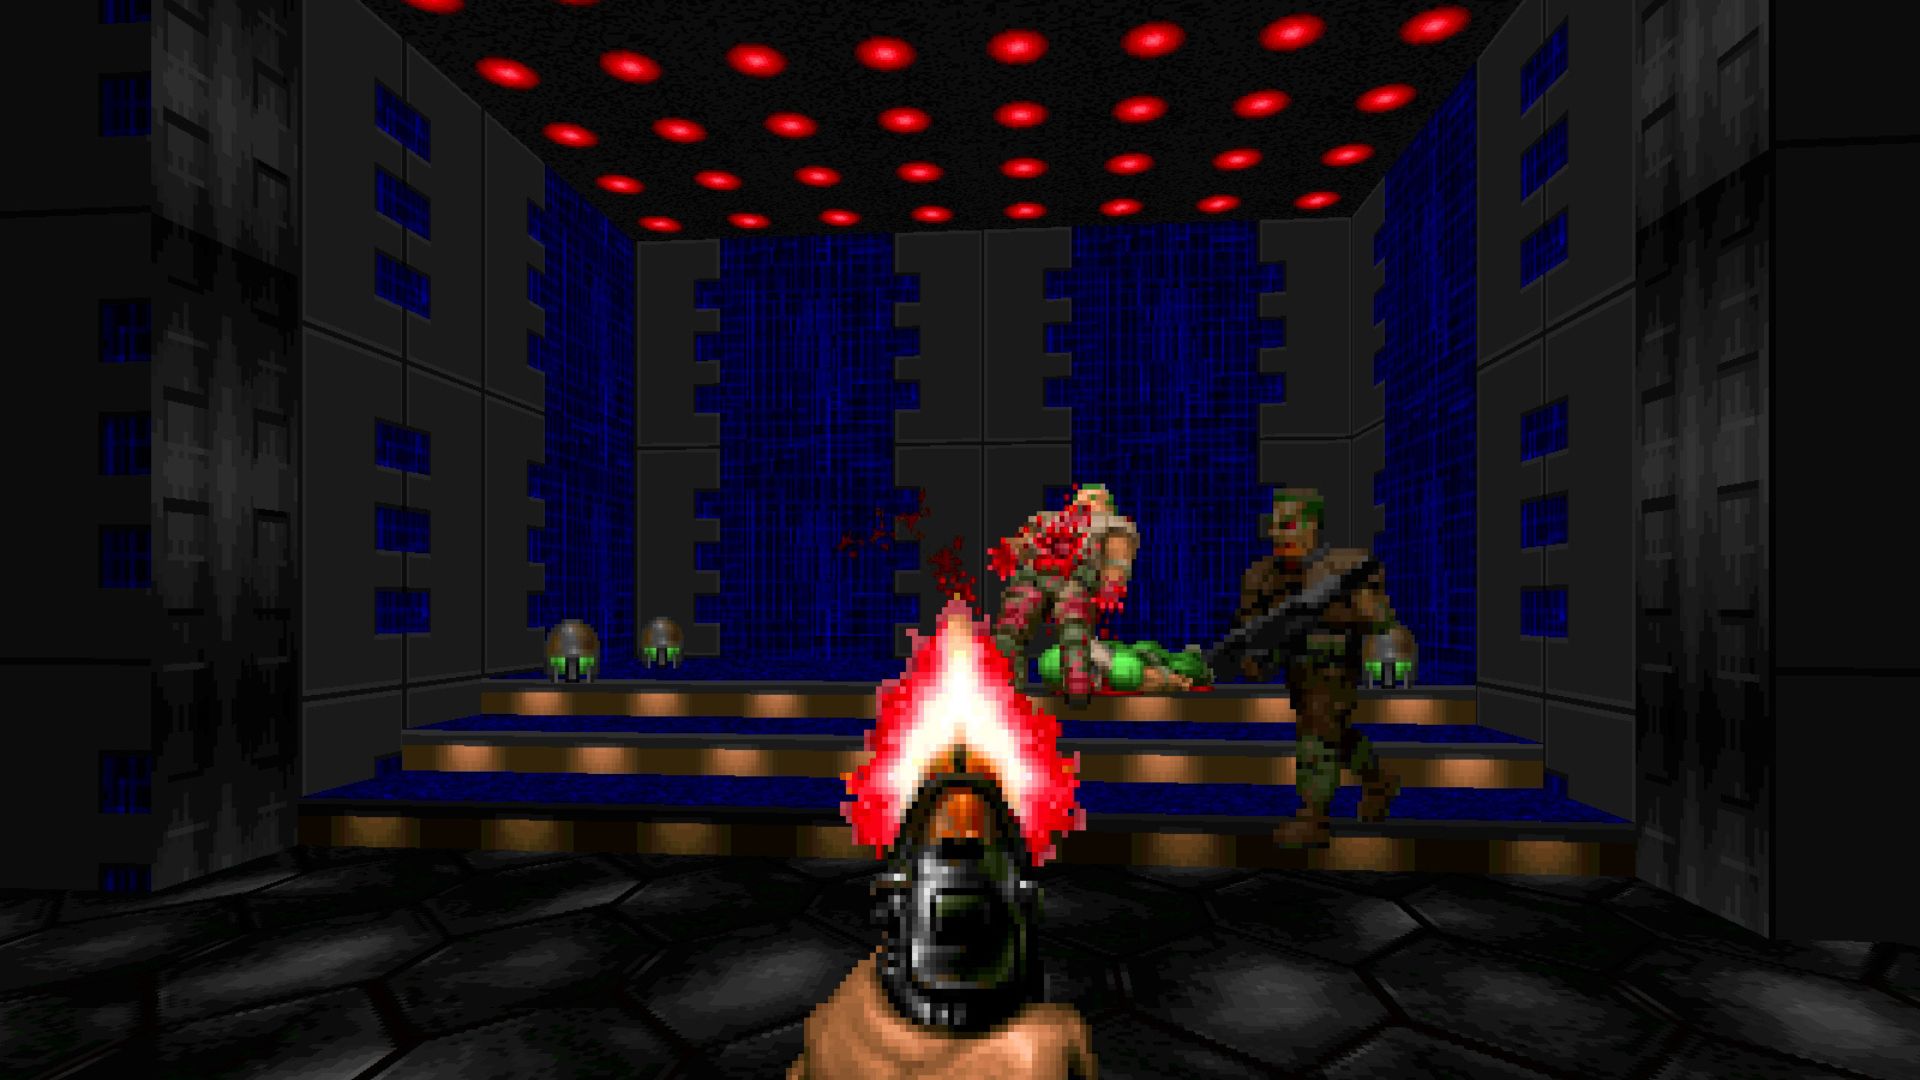 FPS games - a first person shot of a man holding a gun out in a room with red lights on the roof and pixelated demons dying in front of him.